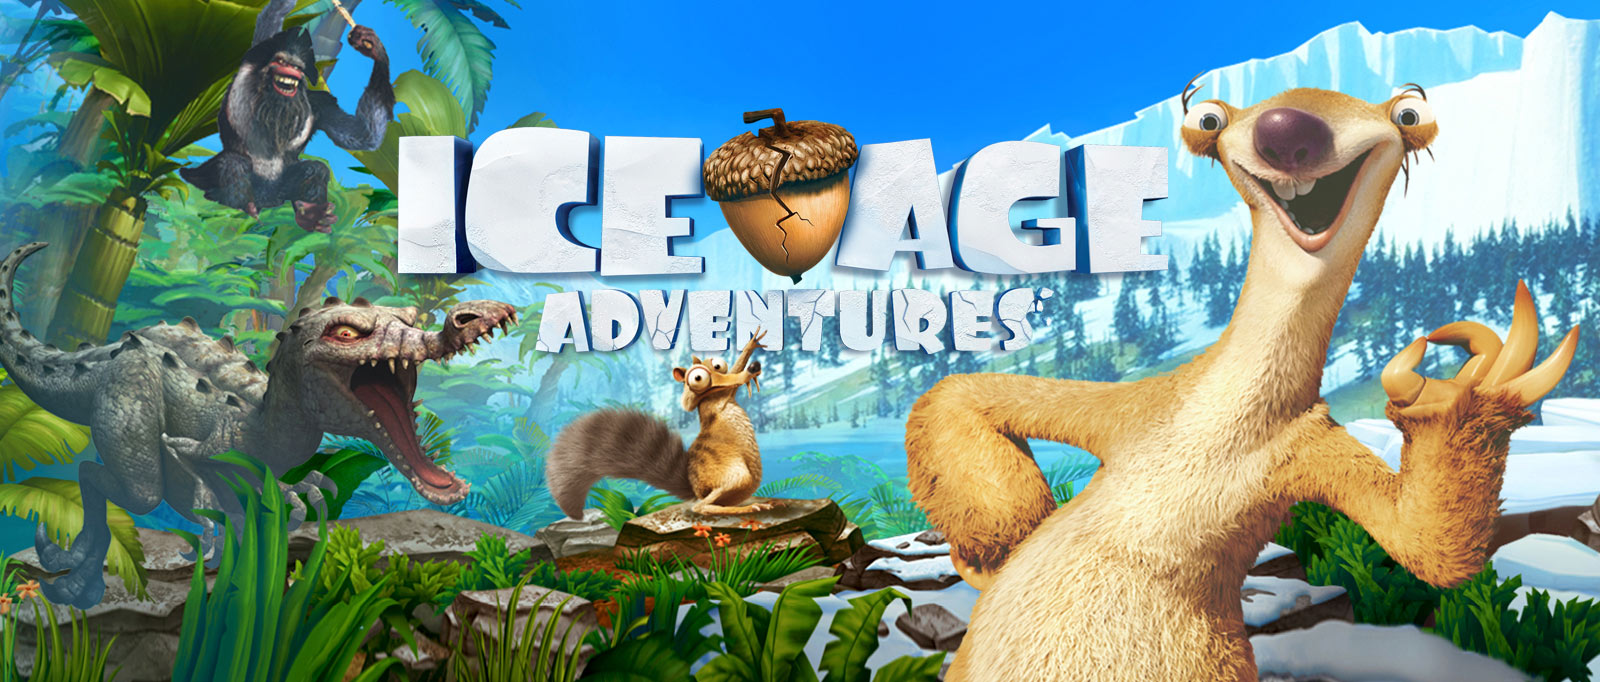 the ice age adventures of buck wild tamil release date